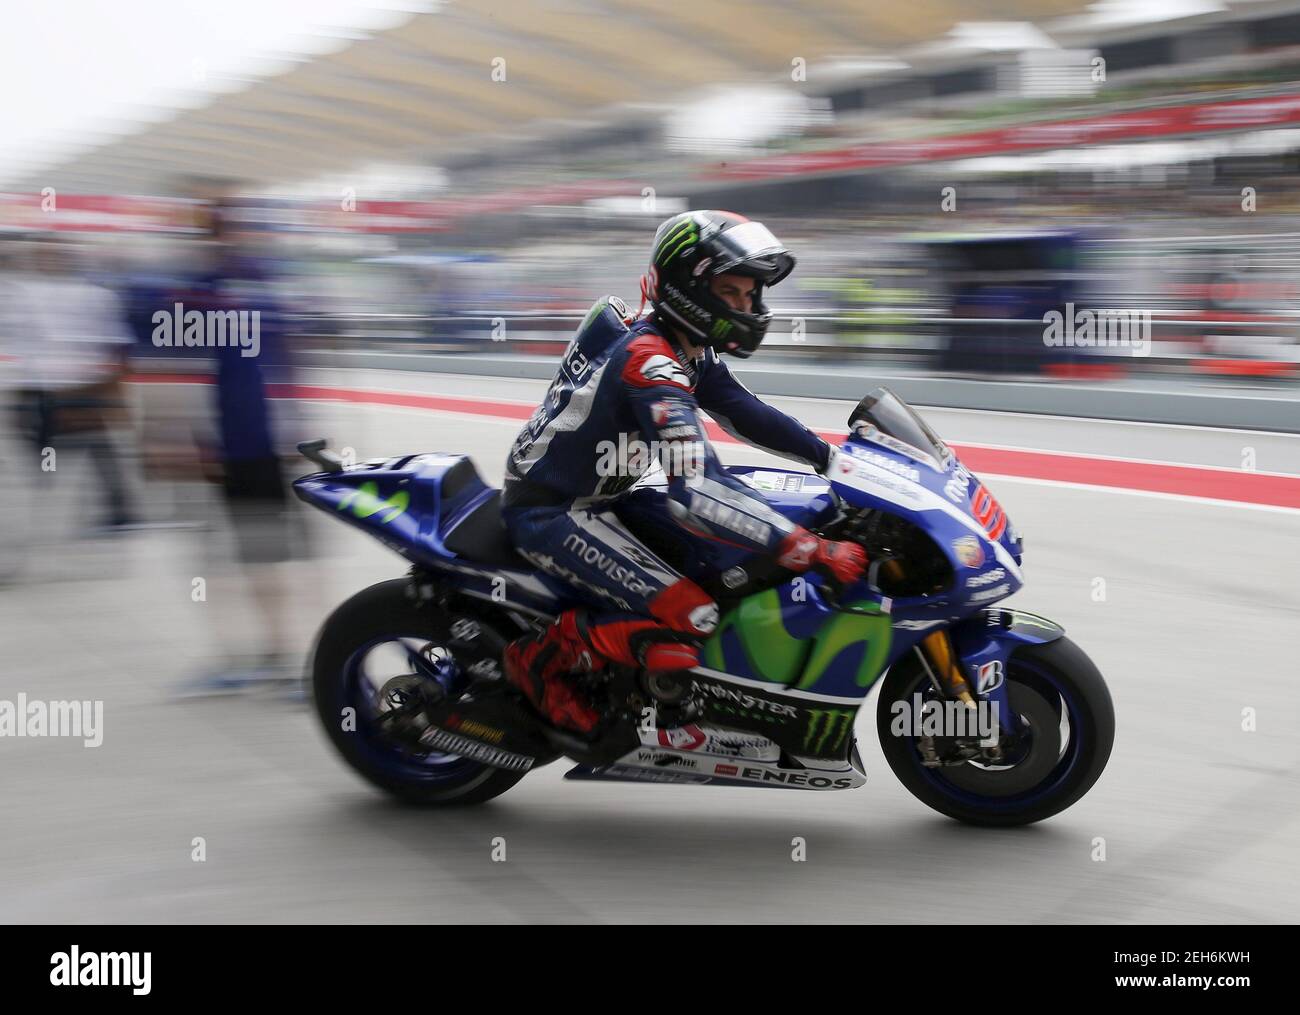 Yamaha MotoGP rider Jorge Lorenzo of Spain leaves the garage before the qualifying round of the Malaysian Motorcycle Grand Prix at Sepang International Circuit near Kuala Lumpur, Malaysia, October 24, 2015. REUTERS/Olivia Harris   Picture Supplied by Action Images Stock Photo